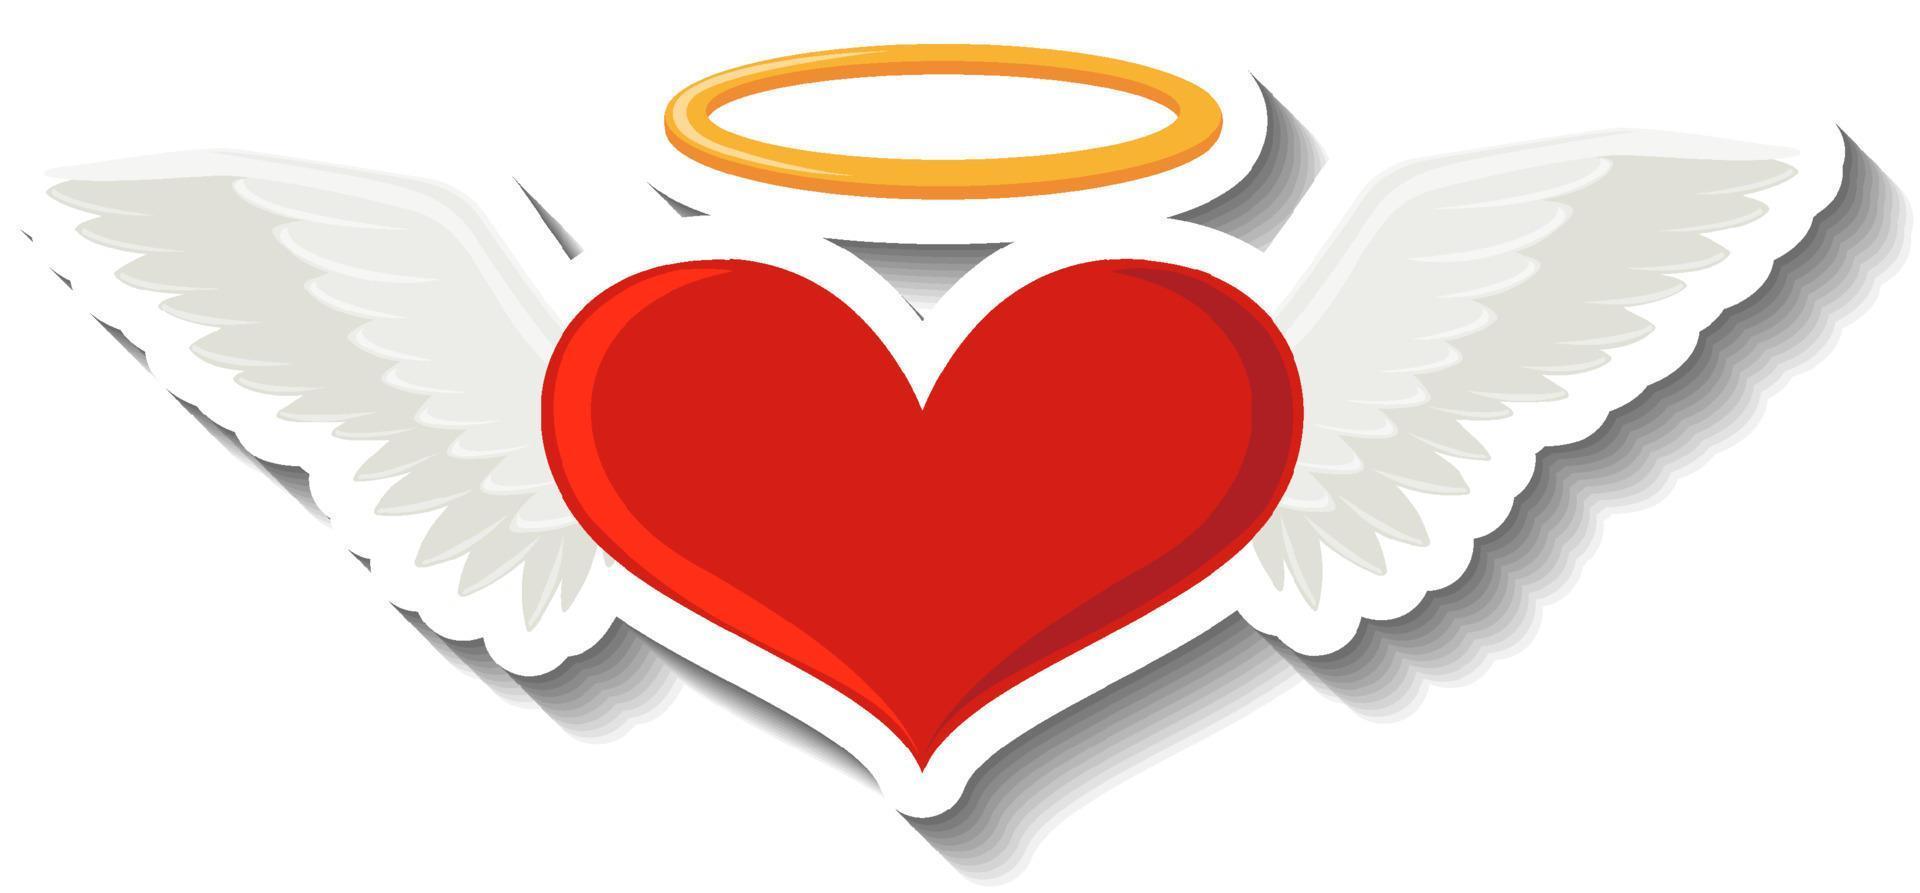 Red heart with angel wings in cartoon style vector